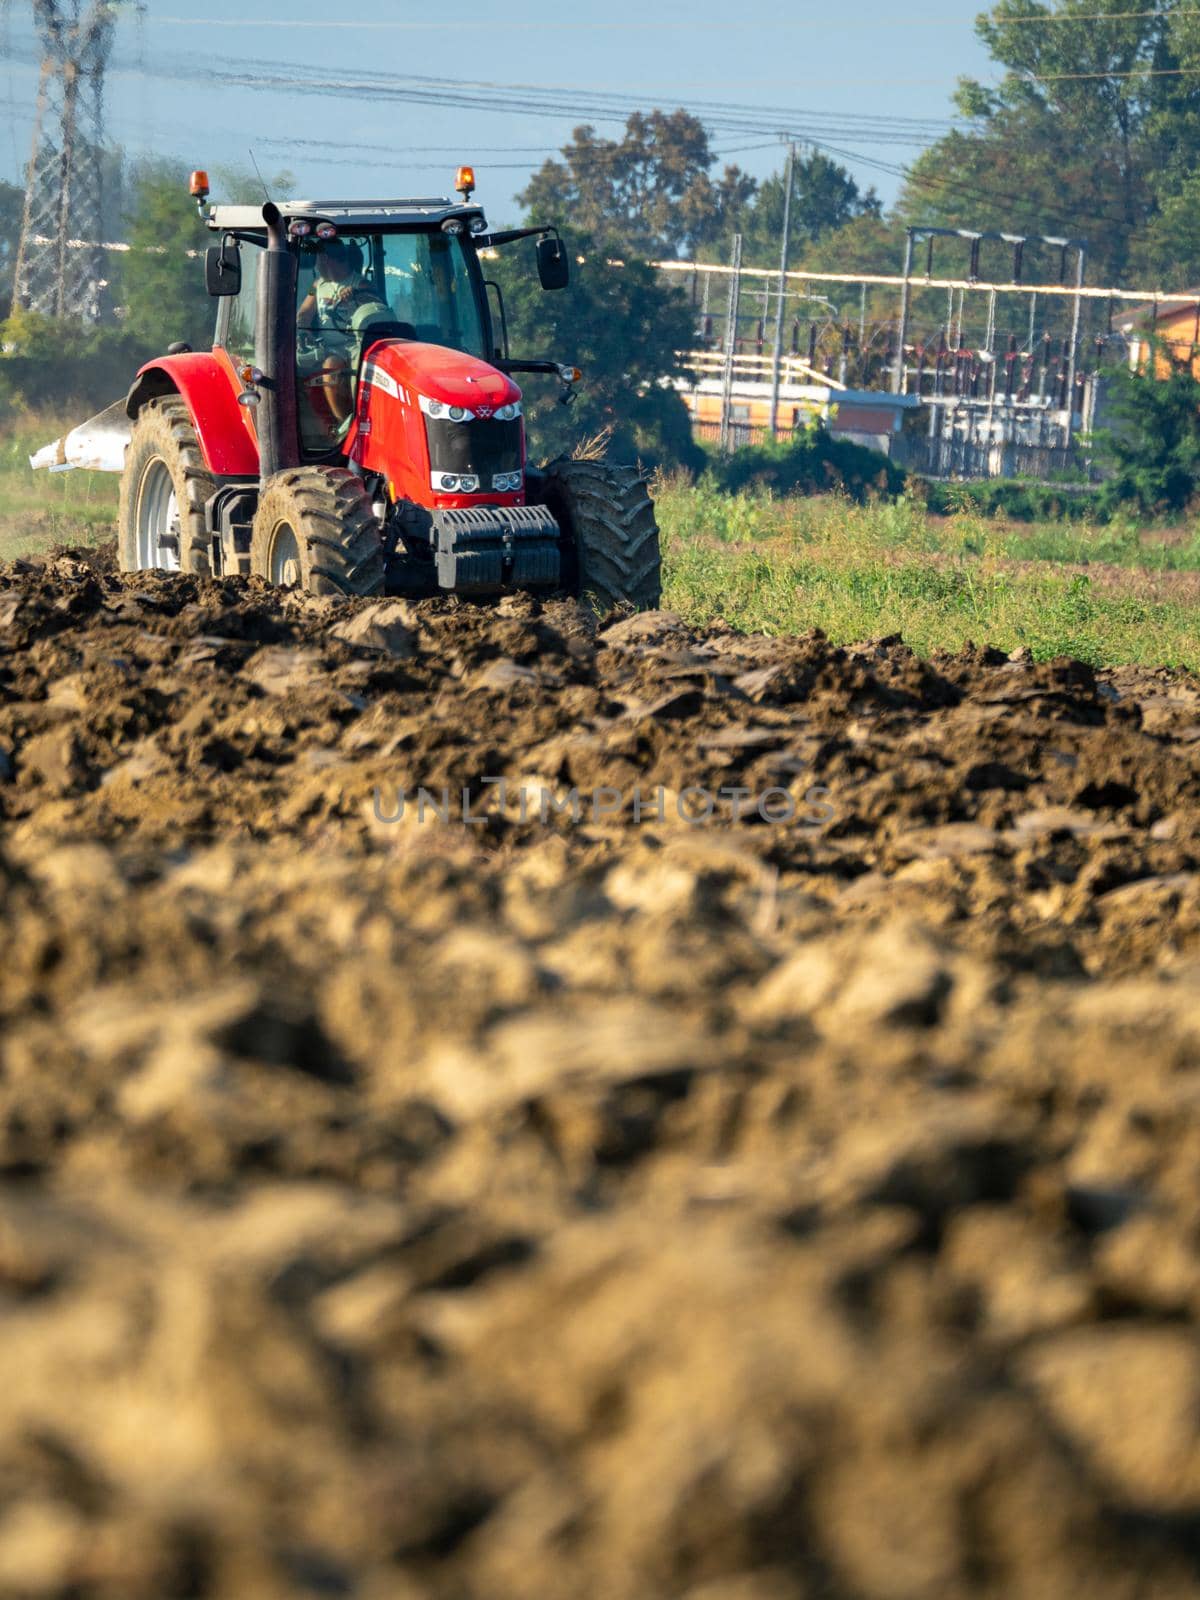 4k video of red tractor plowing the land in the countryside.